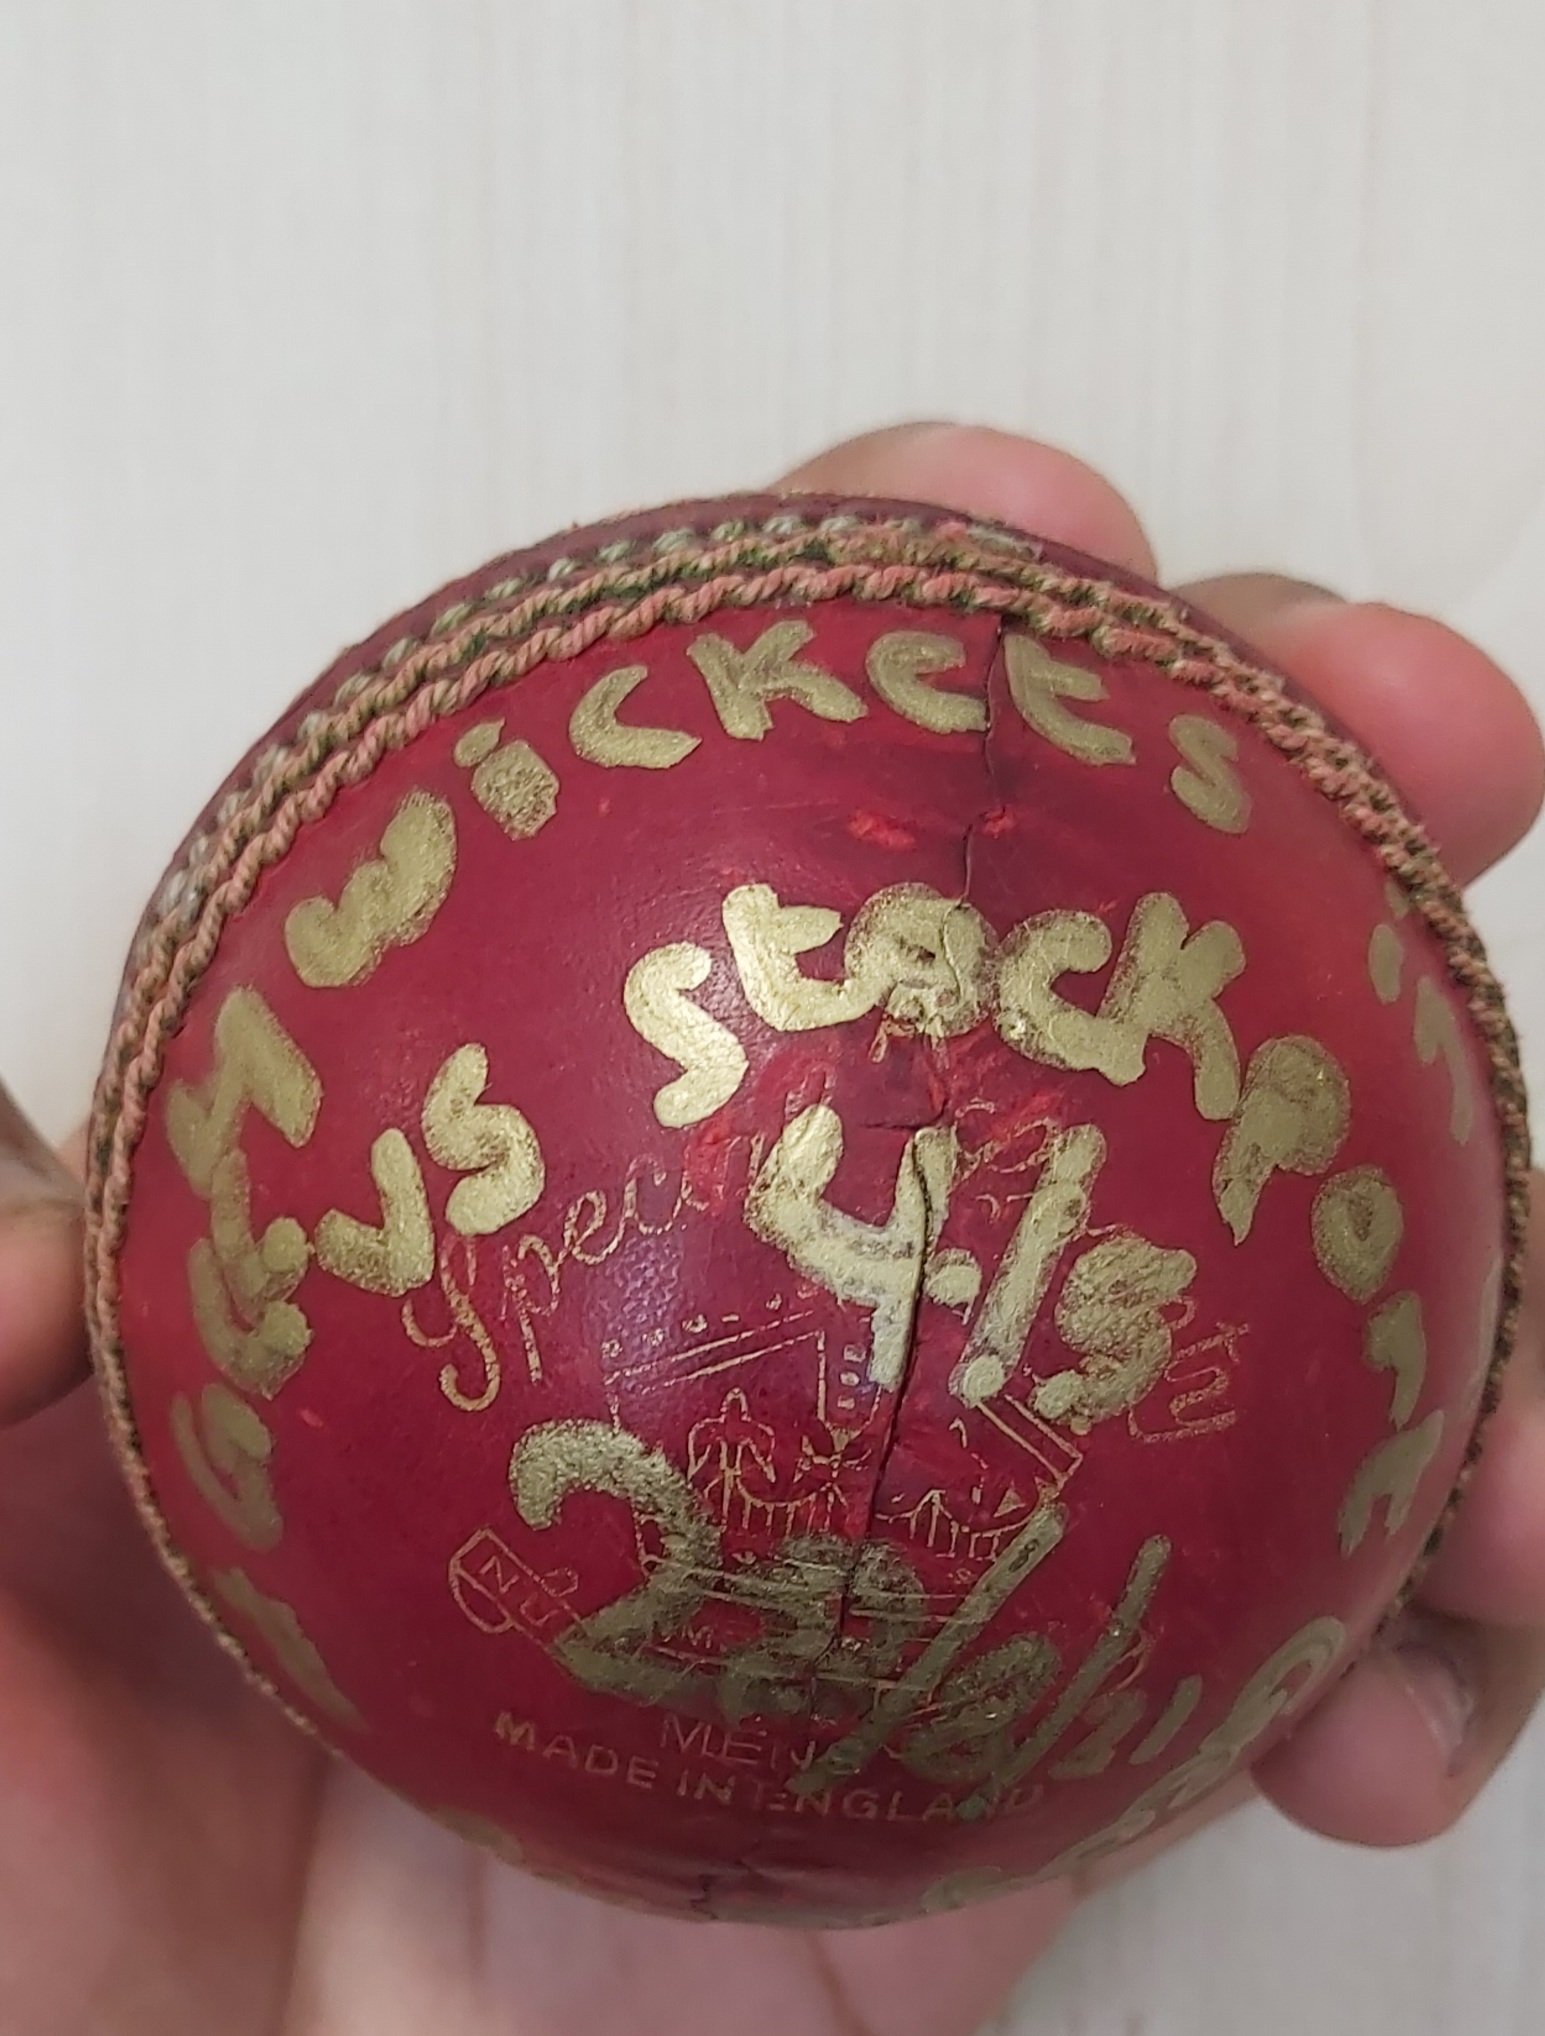 The matchball presented to Sunder after he took four wickets in four balls